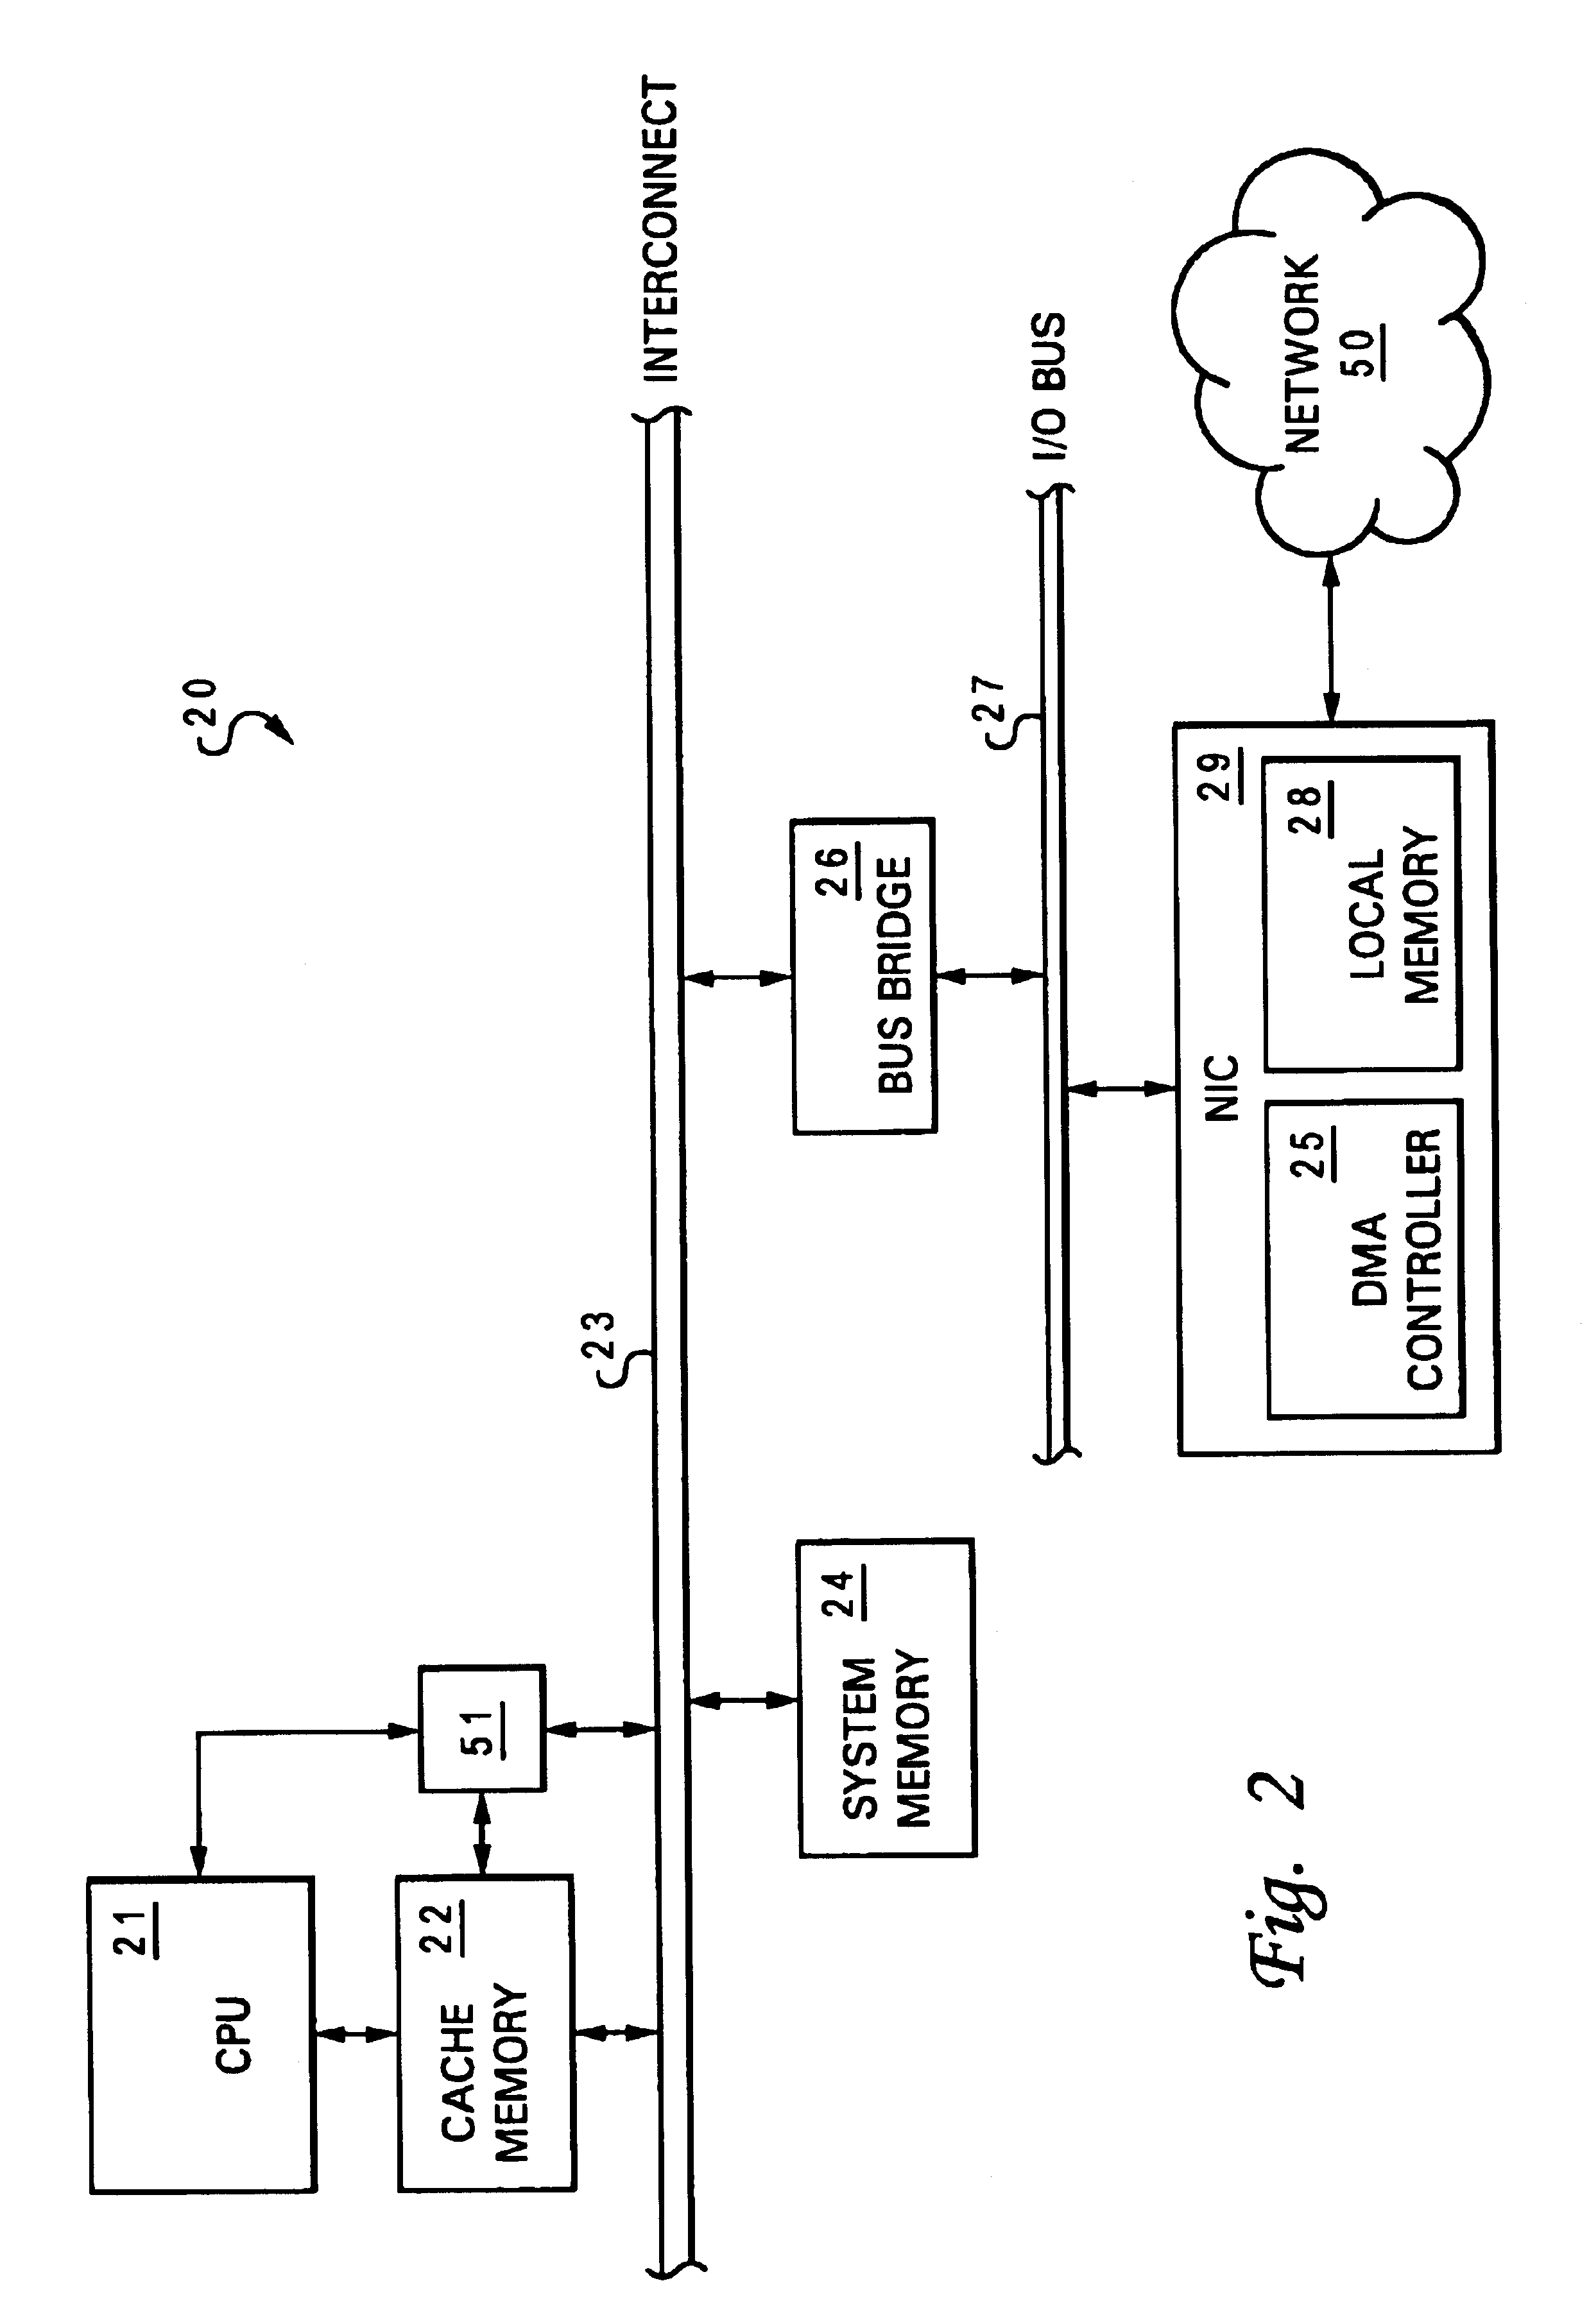 Method and apparatus for accelerating input/output processing using cache injections